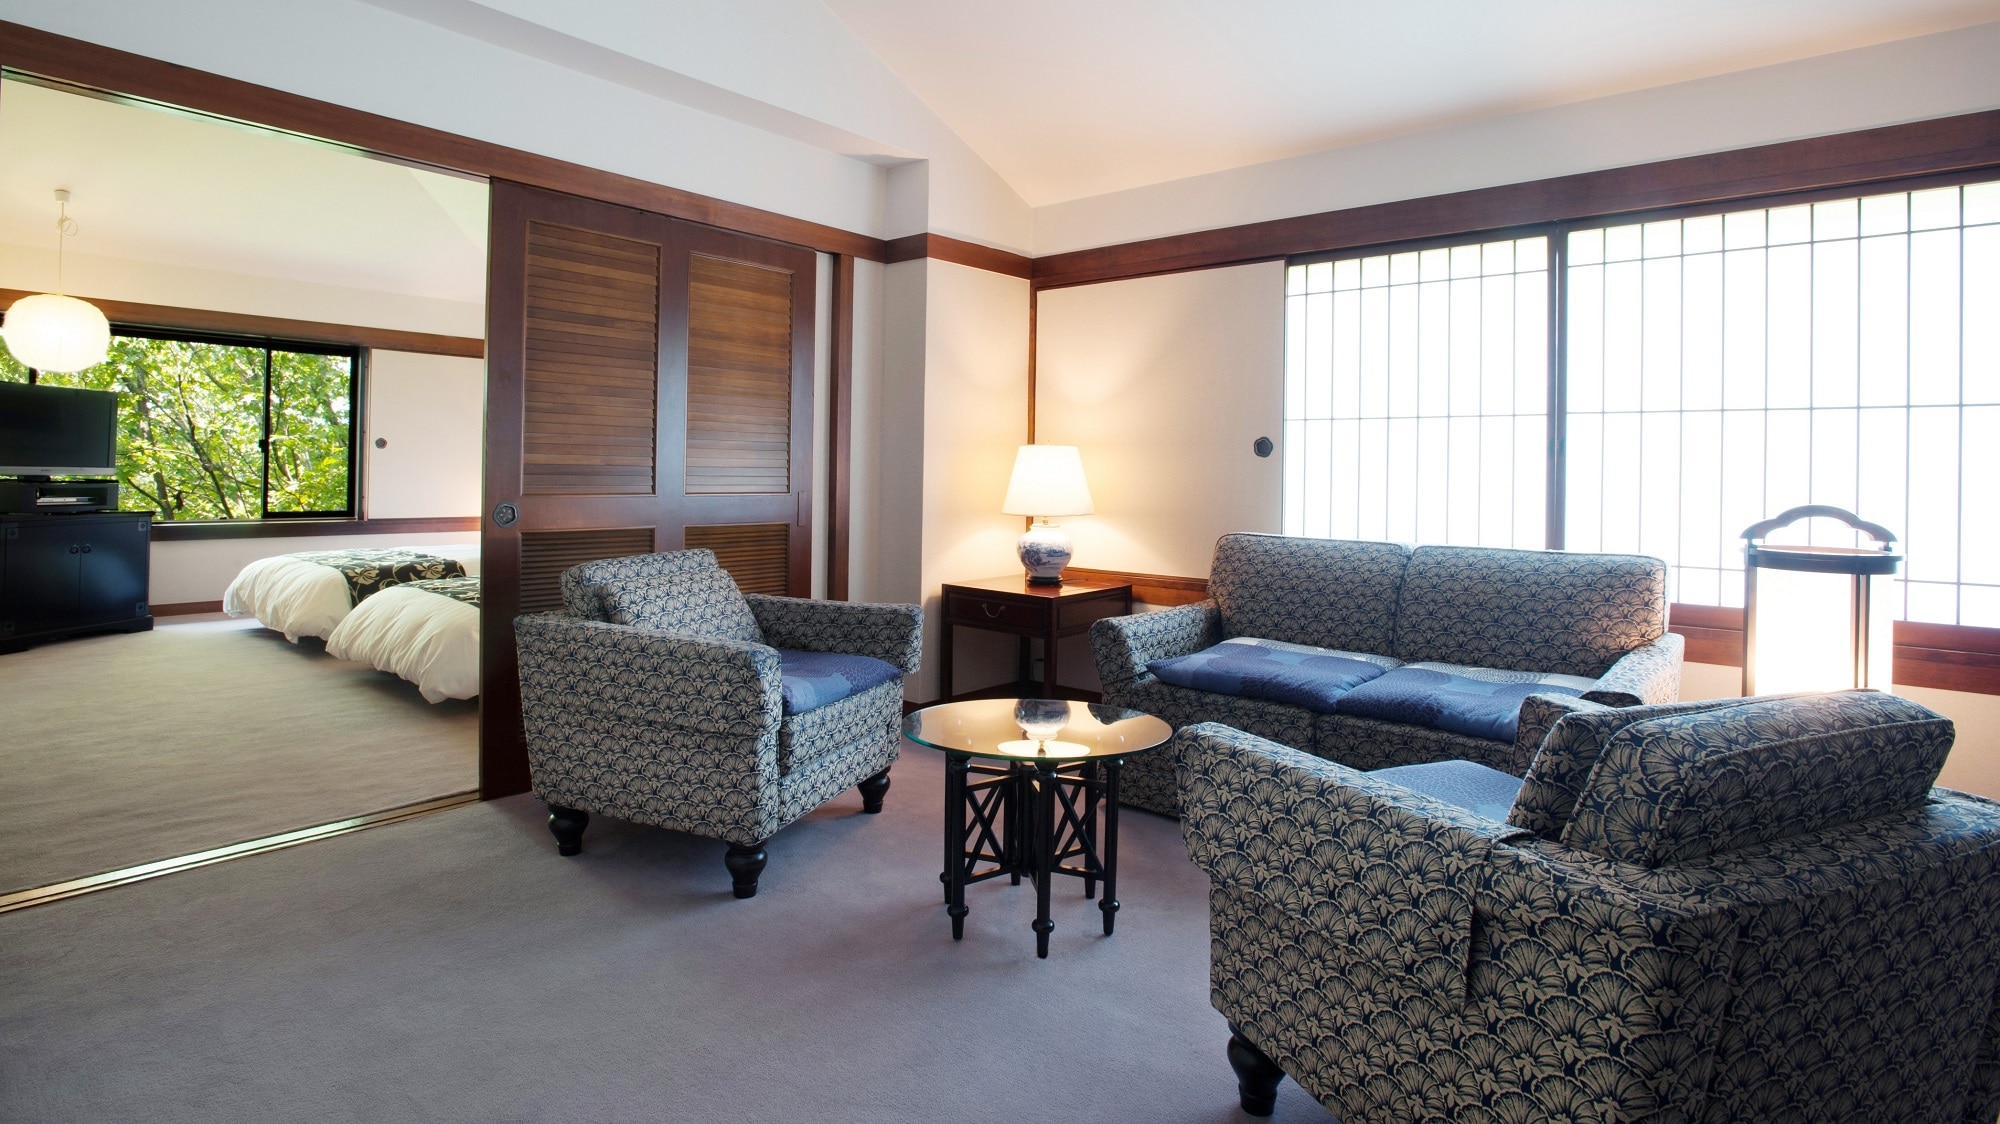 Suite room that promises a luxurious stay